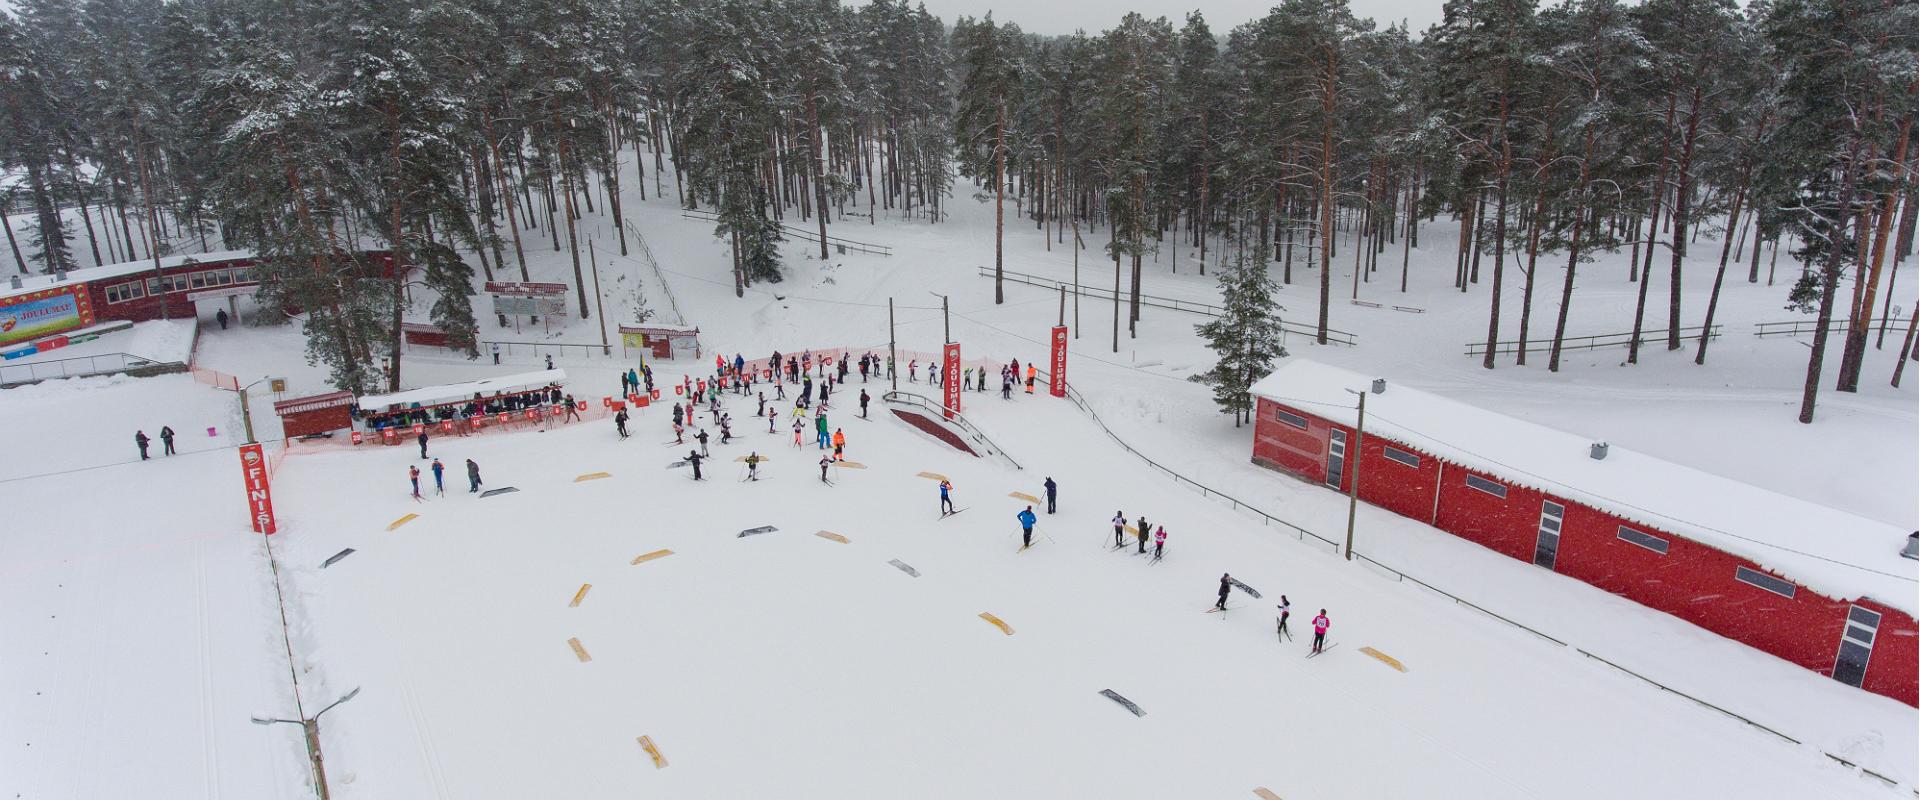 As the snow falls down, Jõulumäe Sports and Recreation Centre becomes a real ski centre. Here, everyone can find a suitable cross-country ski trail – 